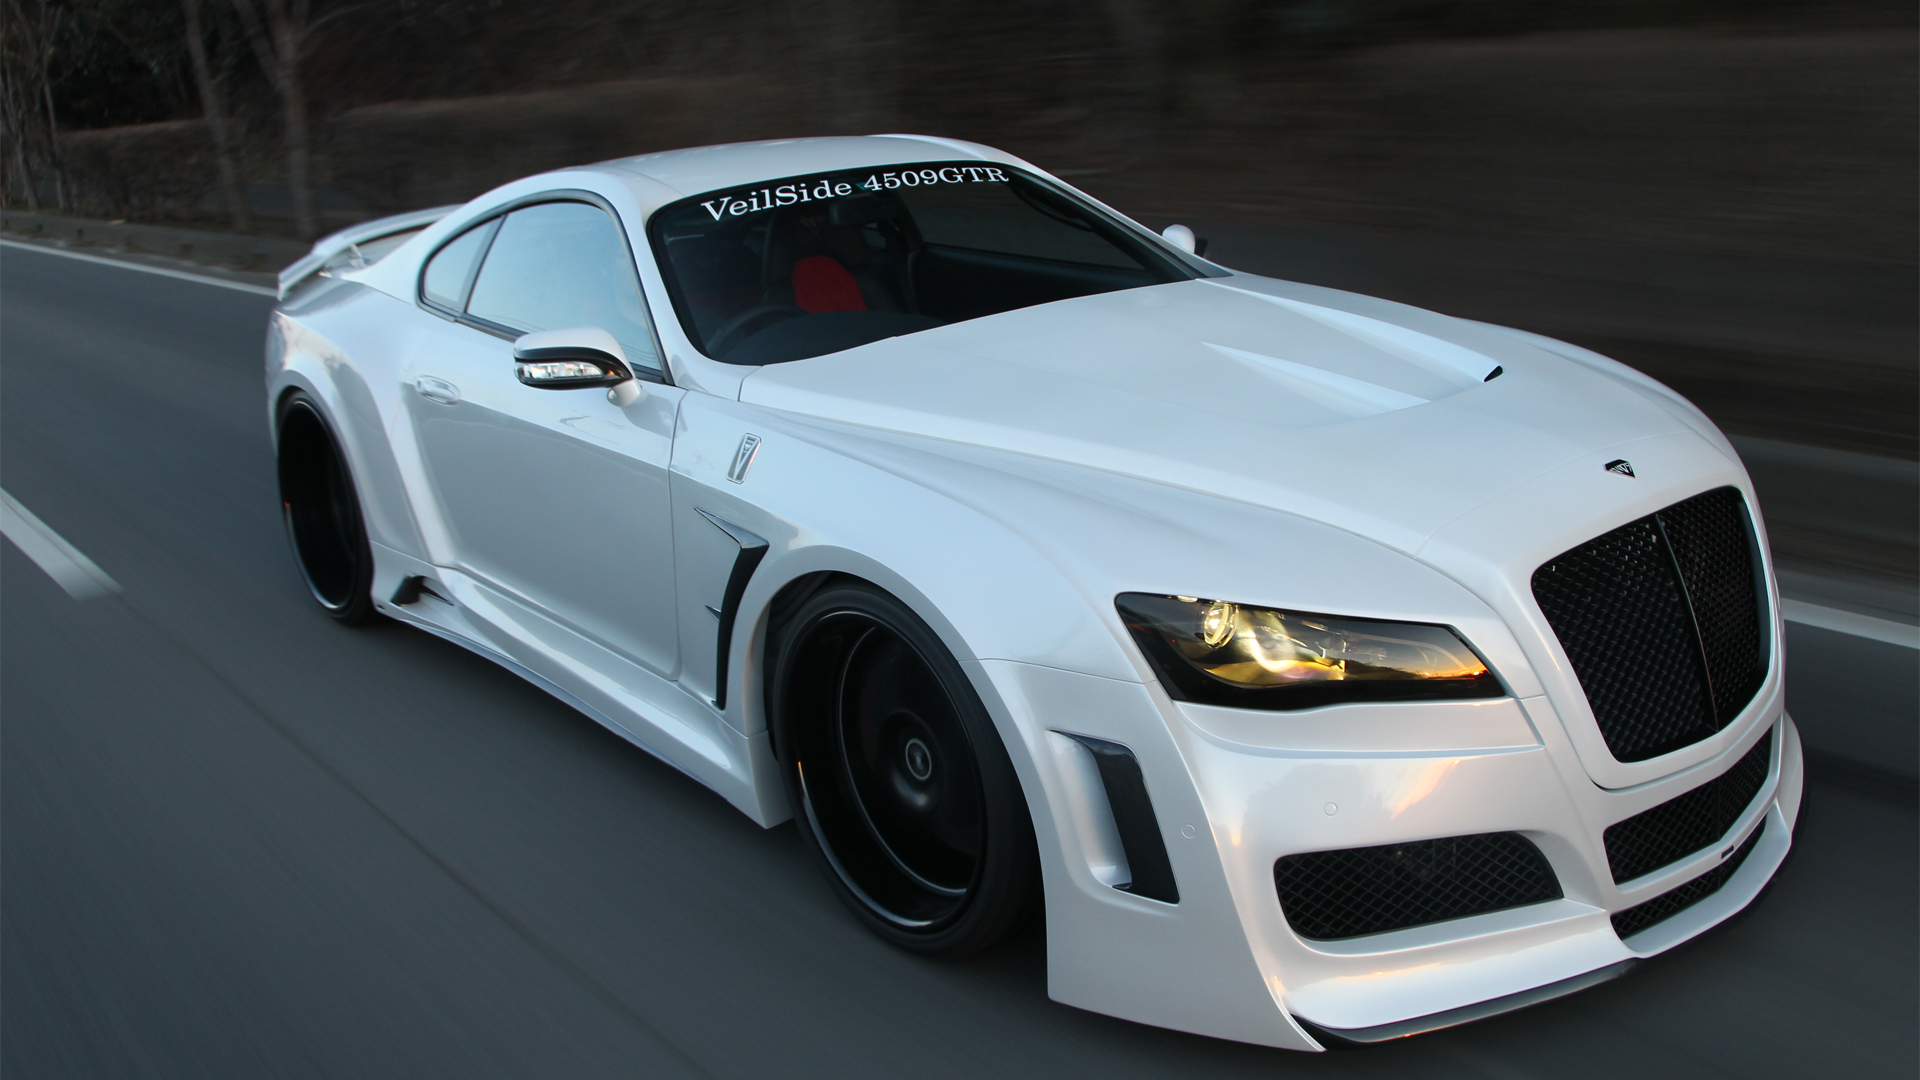 Veilside Gtr Can You Guess What Is Under The Bodykit